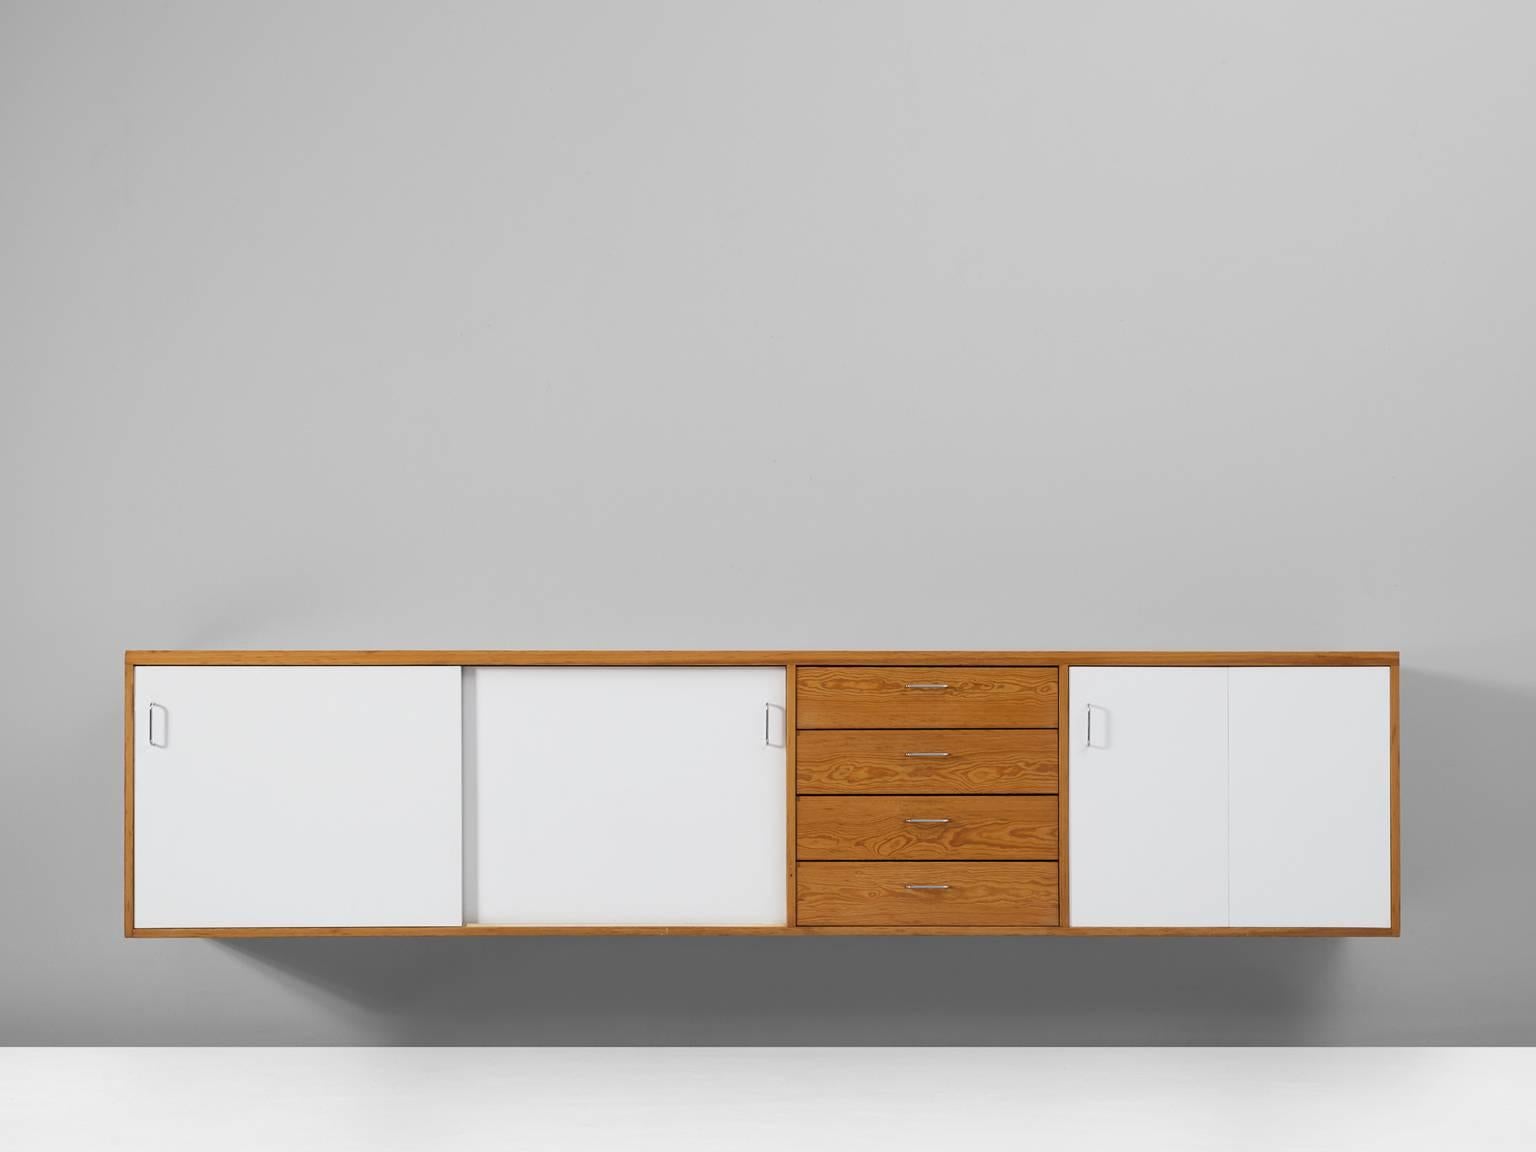 Cabinet, in pine, plywood and metal, Europe, 1970s.

Wall-mounted cabinet in natural pine and white coated plywood. Three white doors on the front are interrupted by a section of four drawers in blond wood. The doors on the left are sliding door,